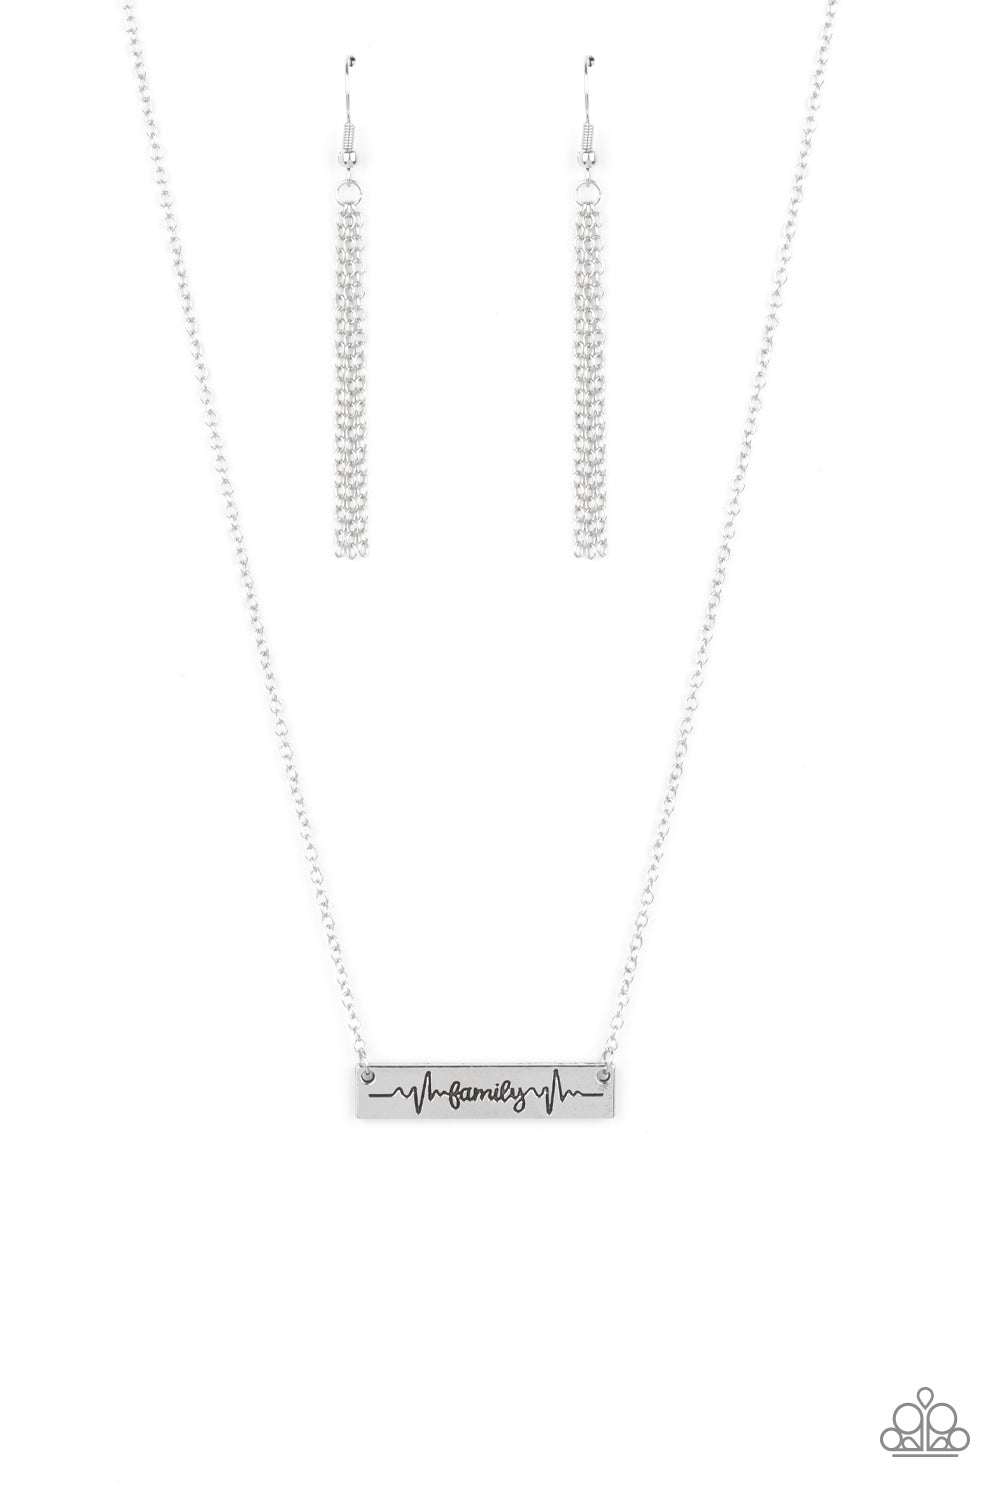 five-dollar-jewelry-living-the-mom-life-silver-necklace-paparazzi-accessories